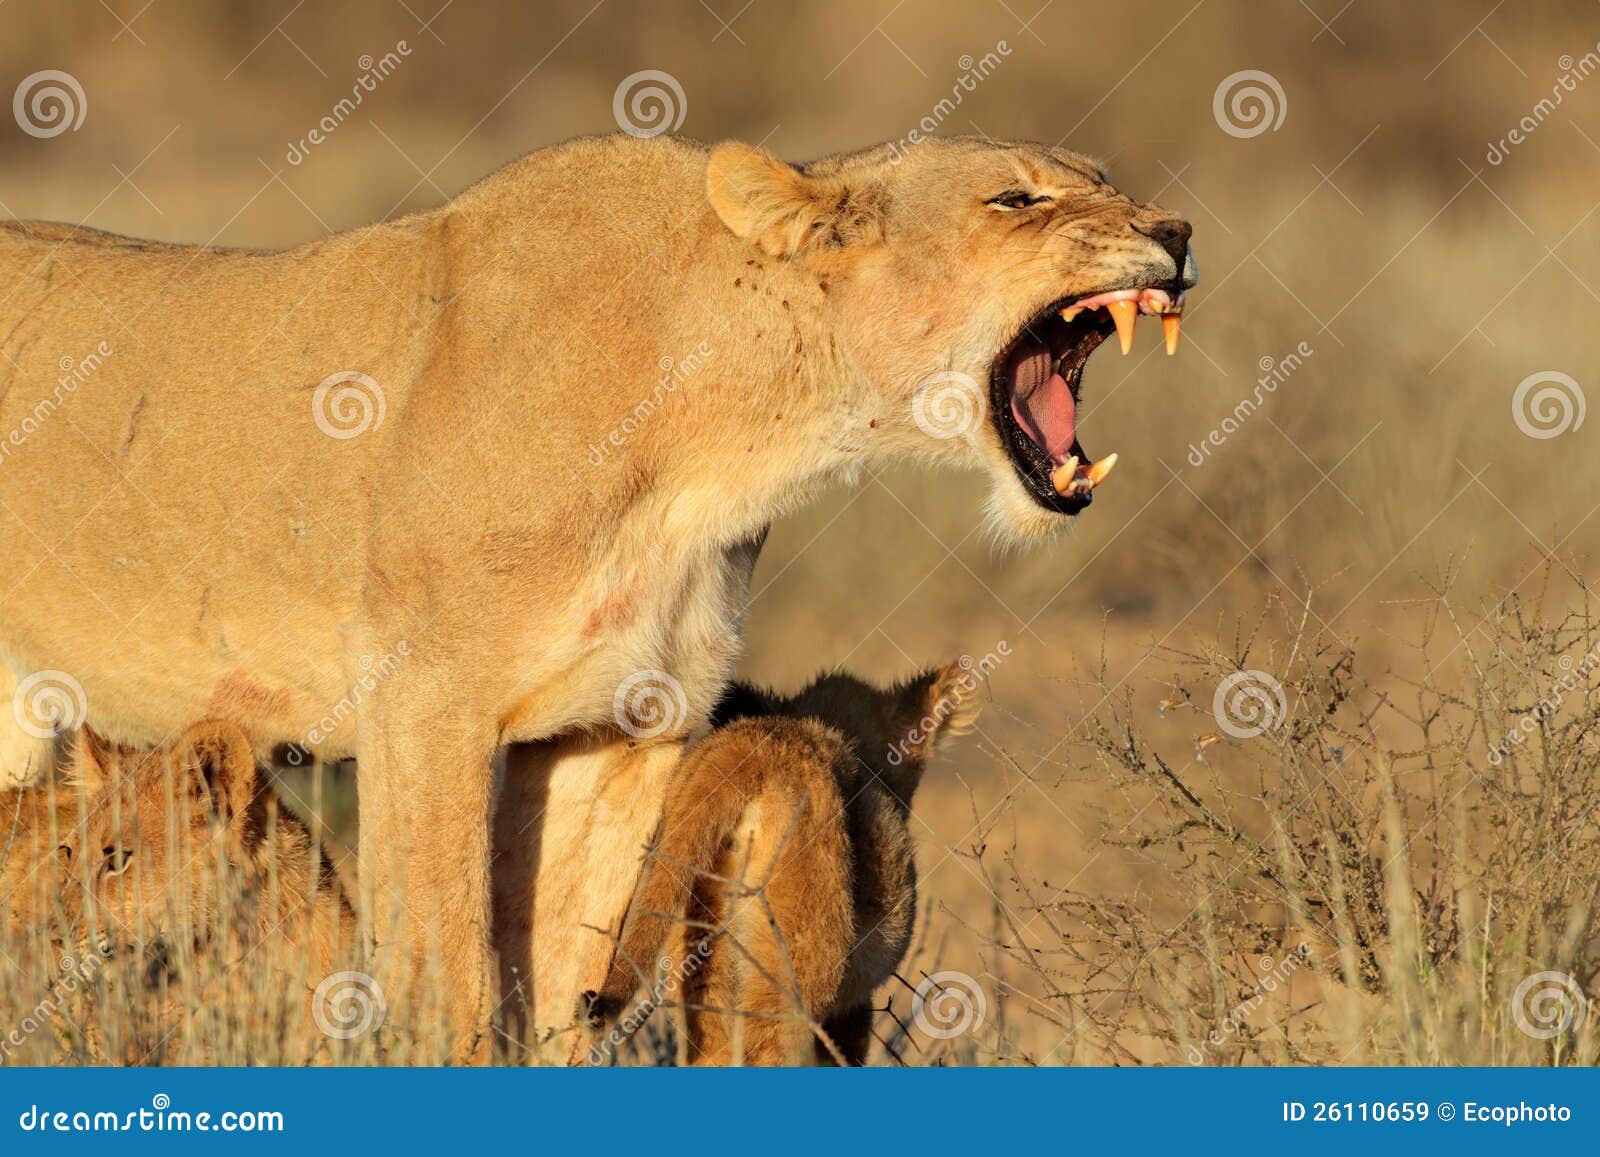 aggressive lioness with cubs